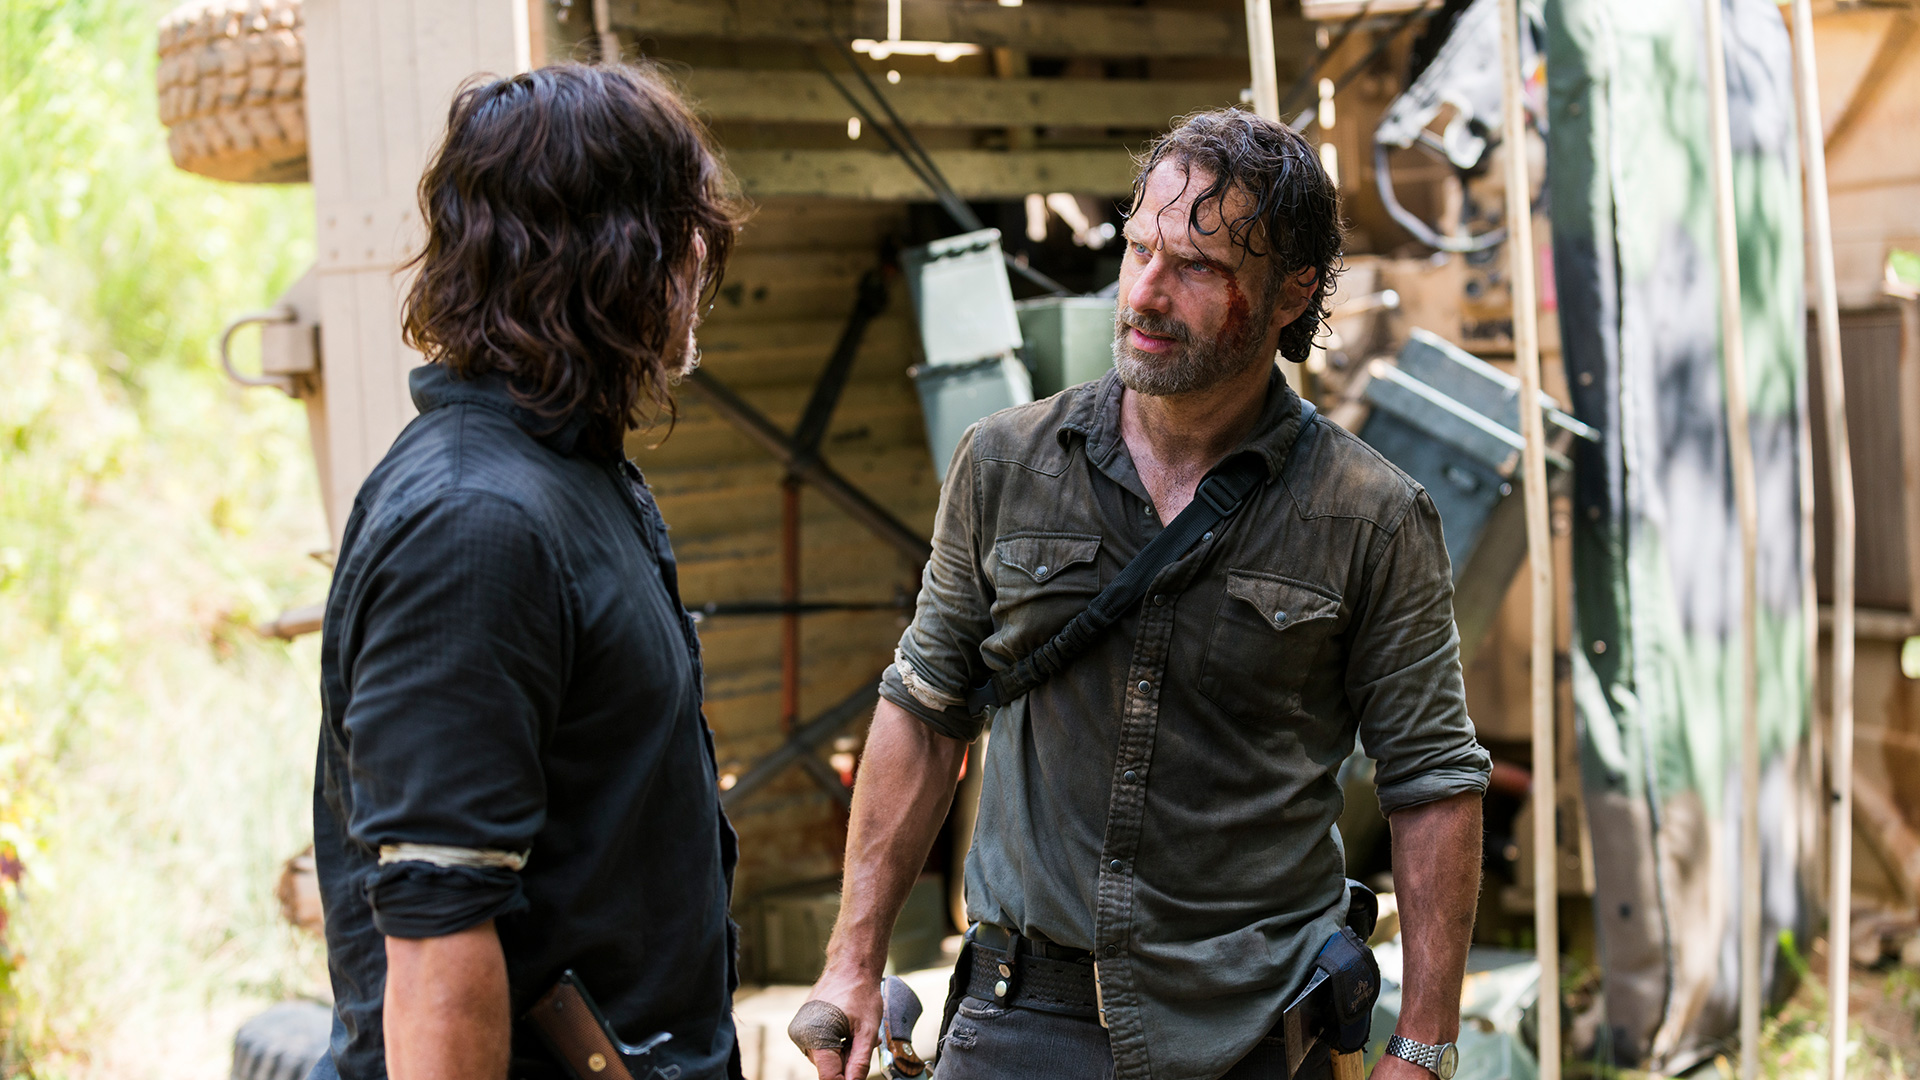 Norman Reedus as Daryl Dixon, Andrew Lincoln as Rick Grimes - The Walking Dead _ Season 8, Episode 5 - Photo Credit: Gene Page/AMC